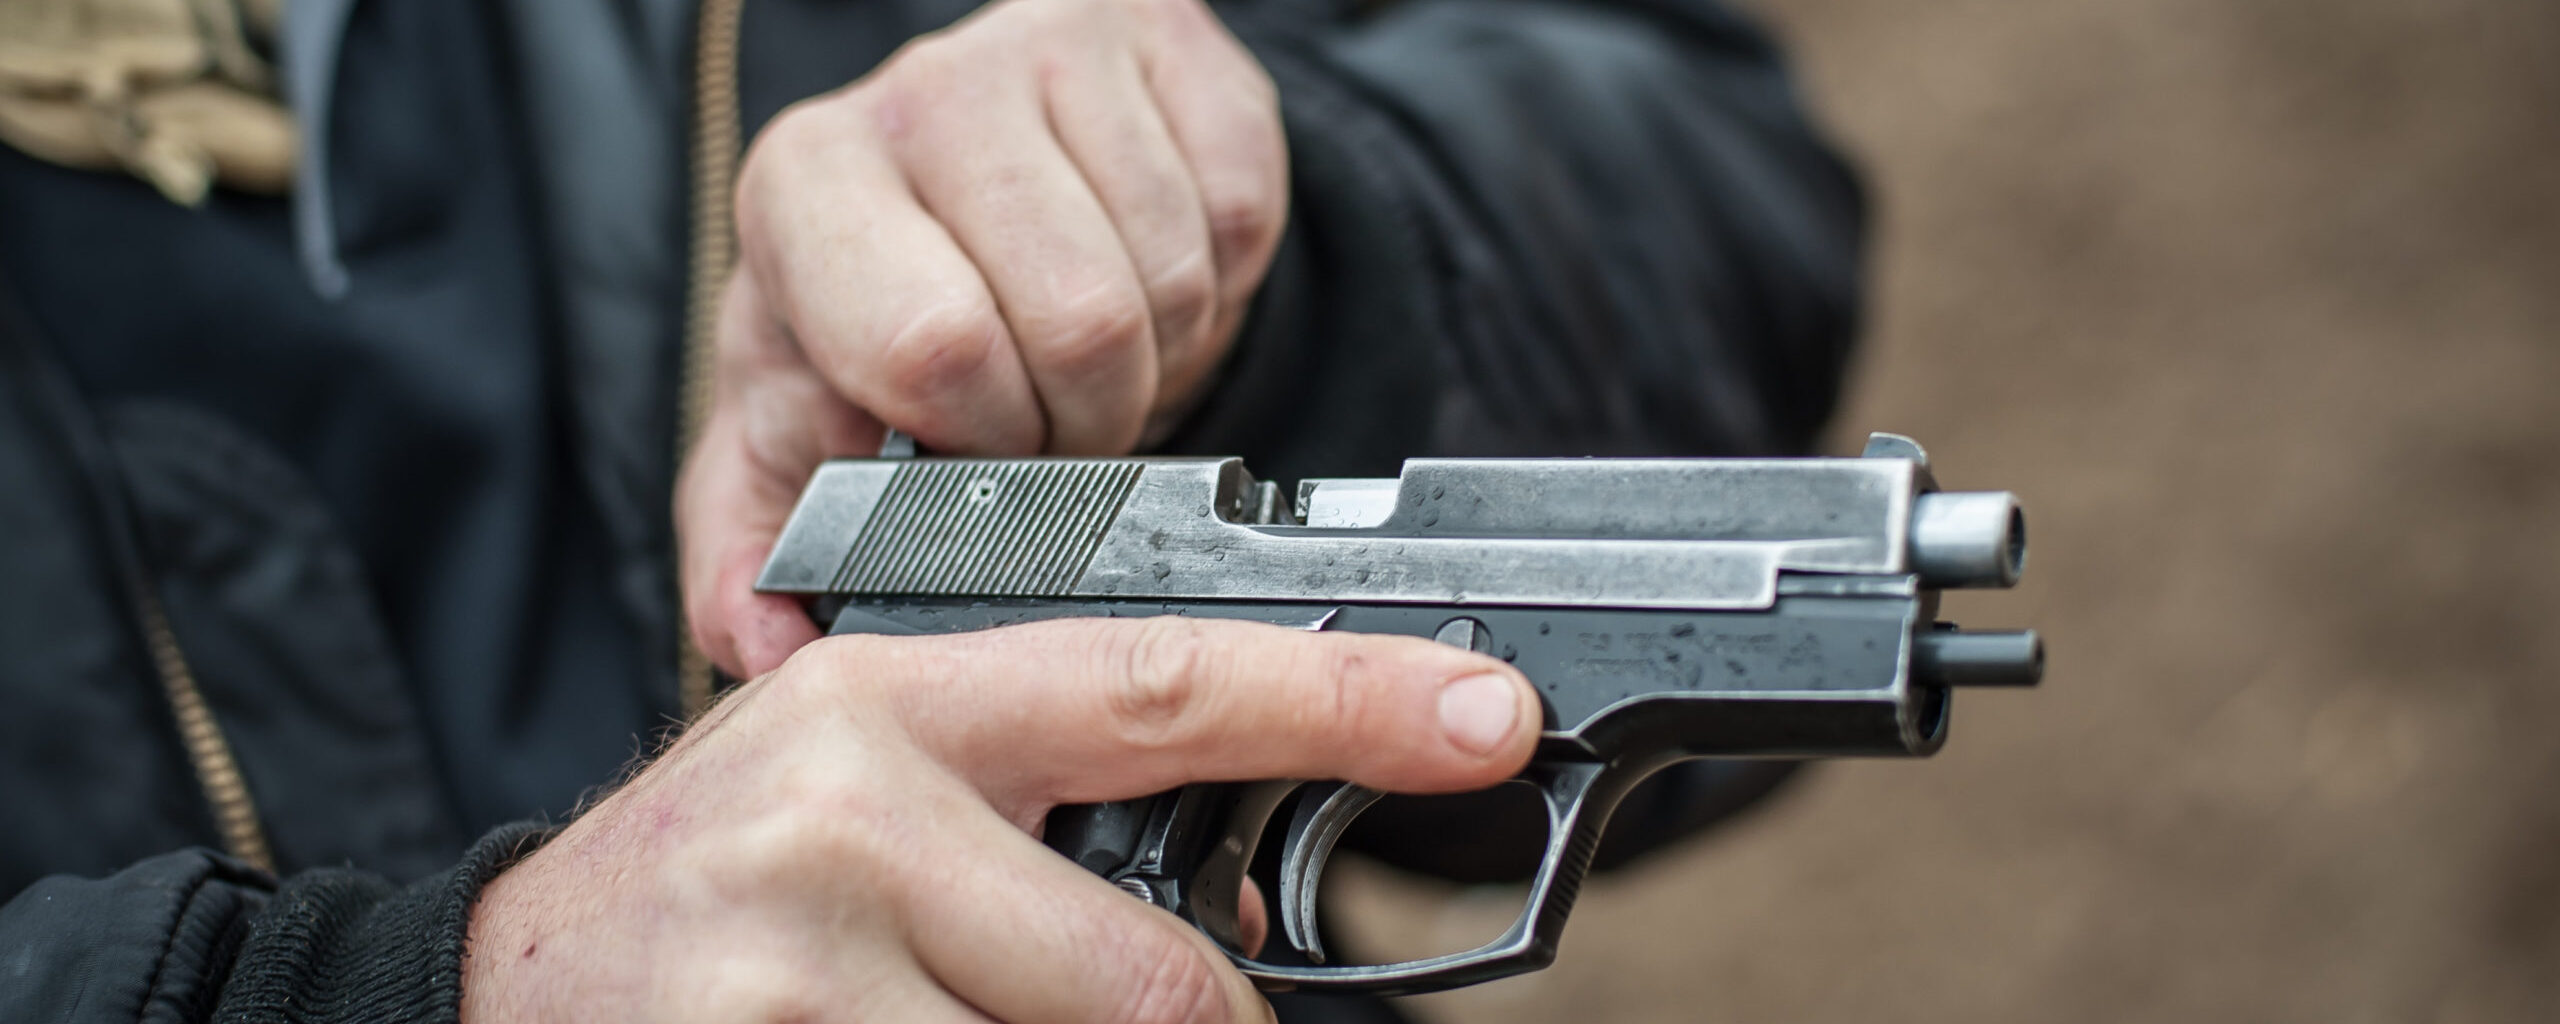 10 Quick and Easy Ways to Deal with Gun Malfunctions